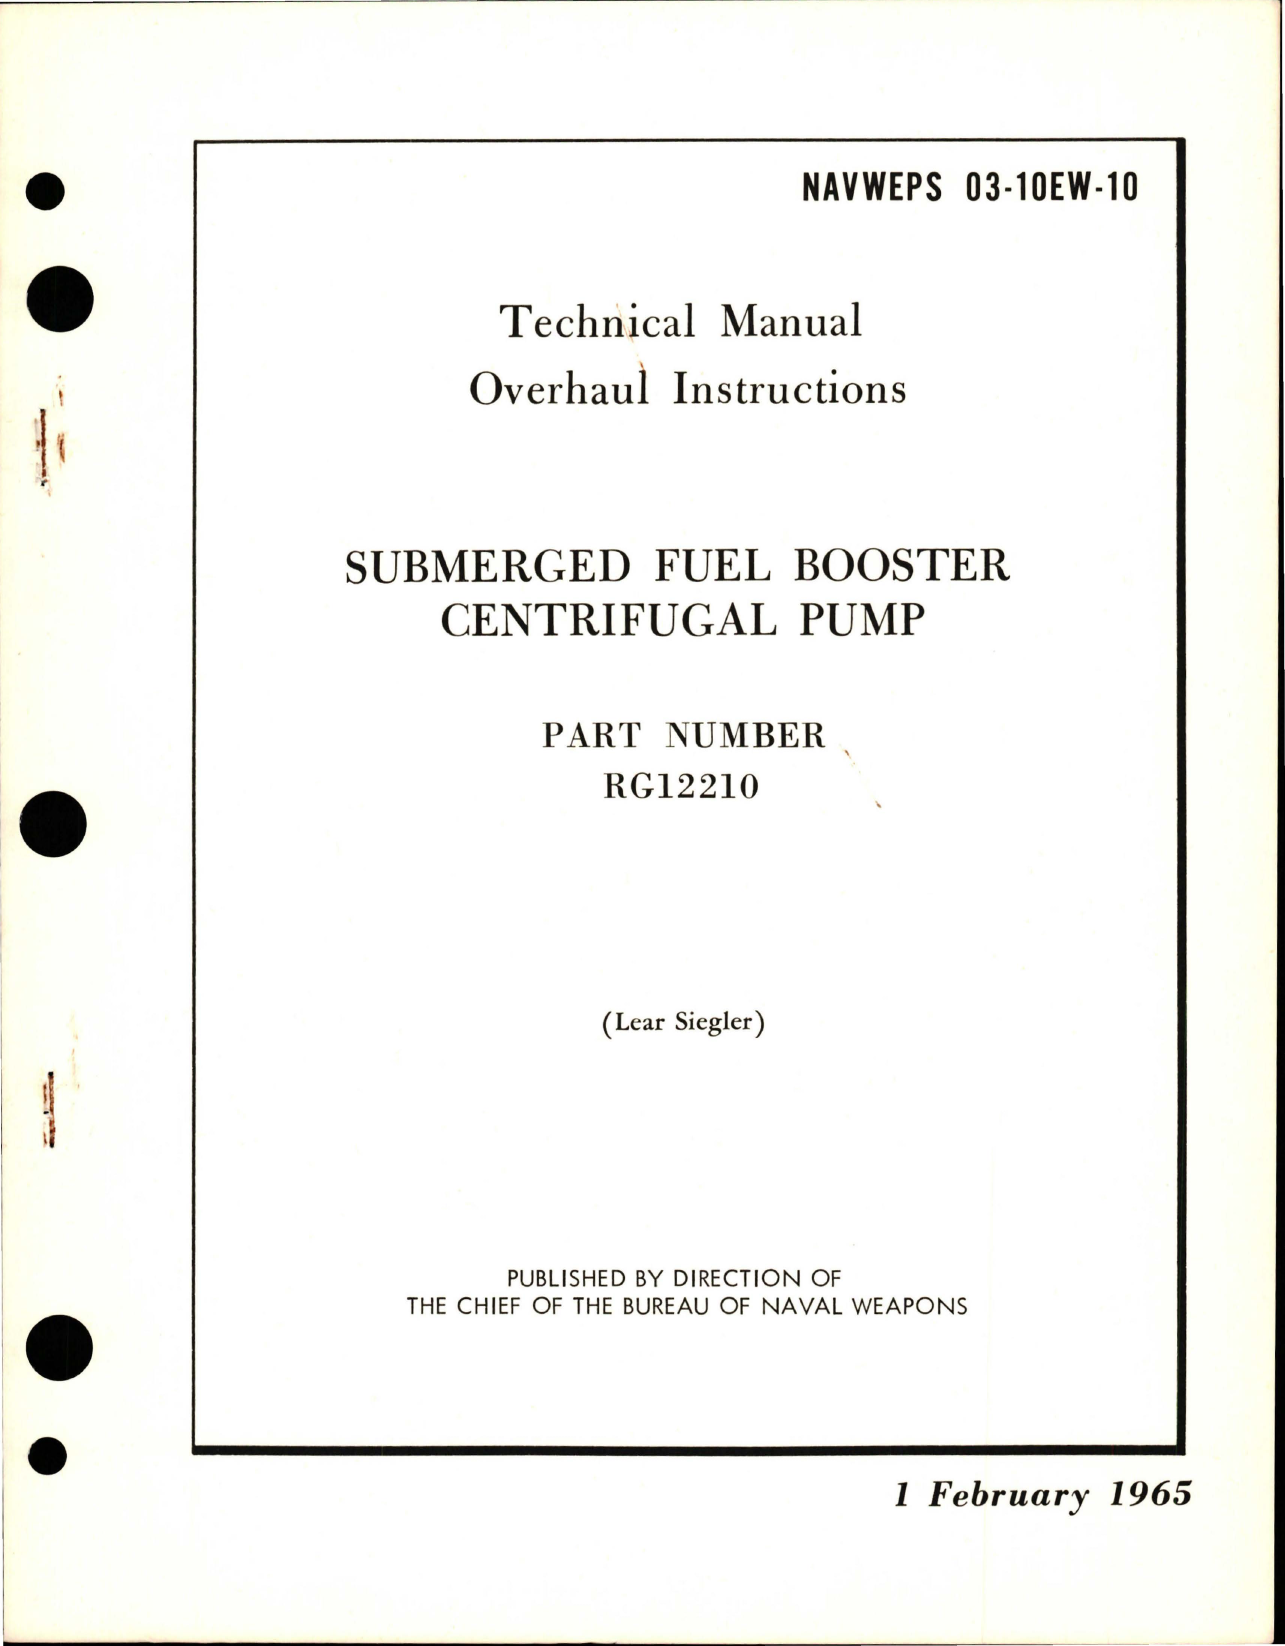 Sample page 1 from AirCorps Library document: Overhaul Instructions for Submerged Fuel Booster Centrifugal Pump - Part RG12210